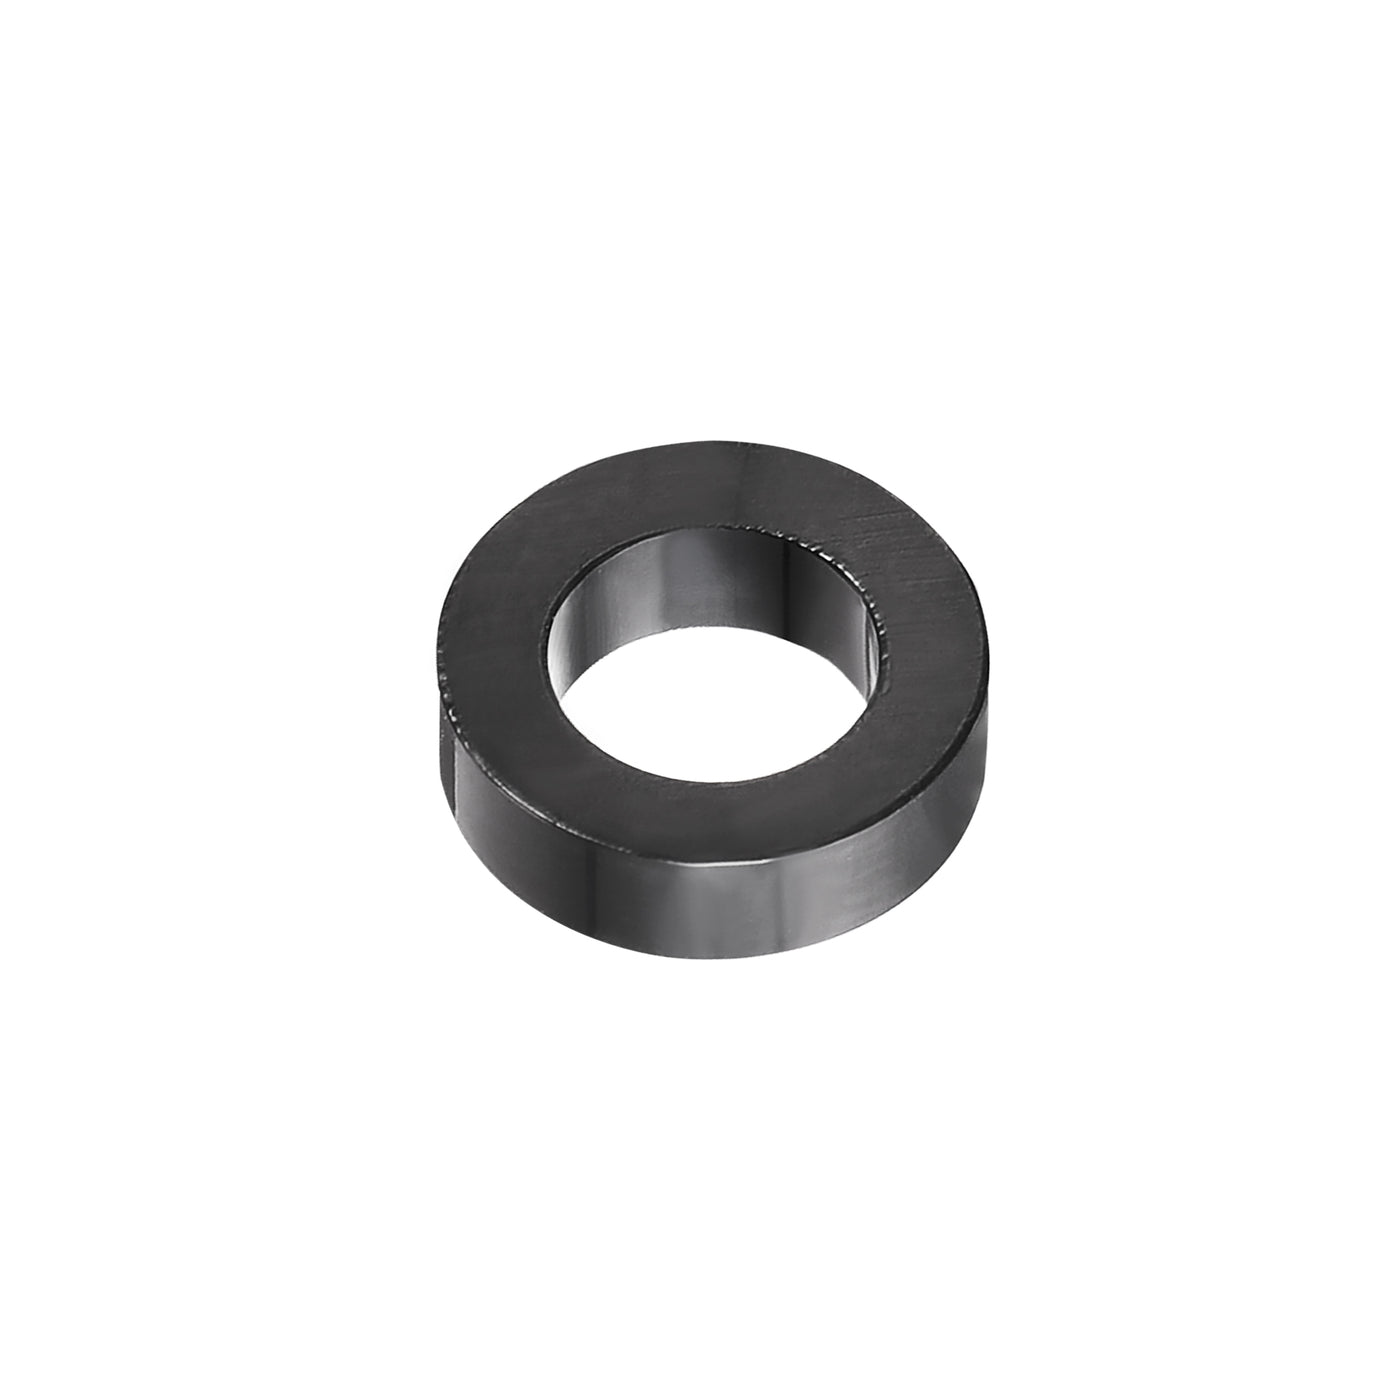 uxcell Uxcell Nylon Round Spacer Washer 4.2mmx7mmx2mm for M4 Screws Black 300Pcs